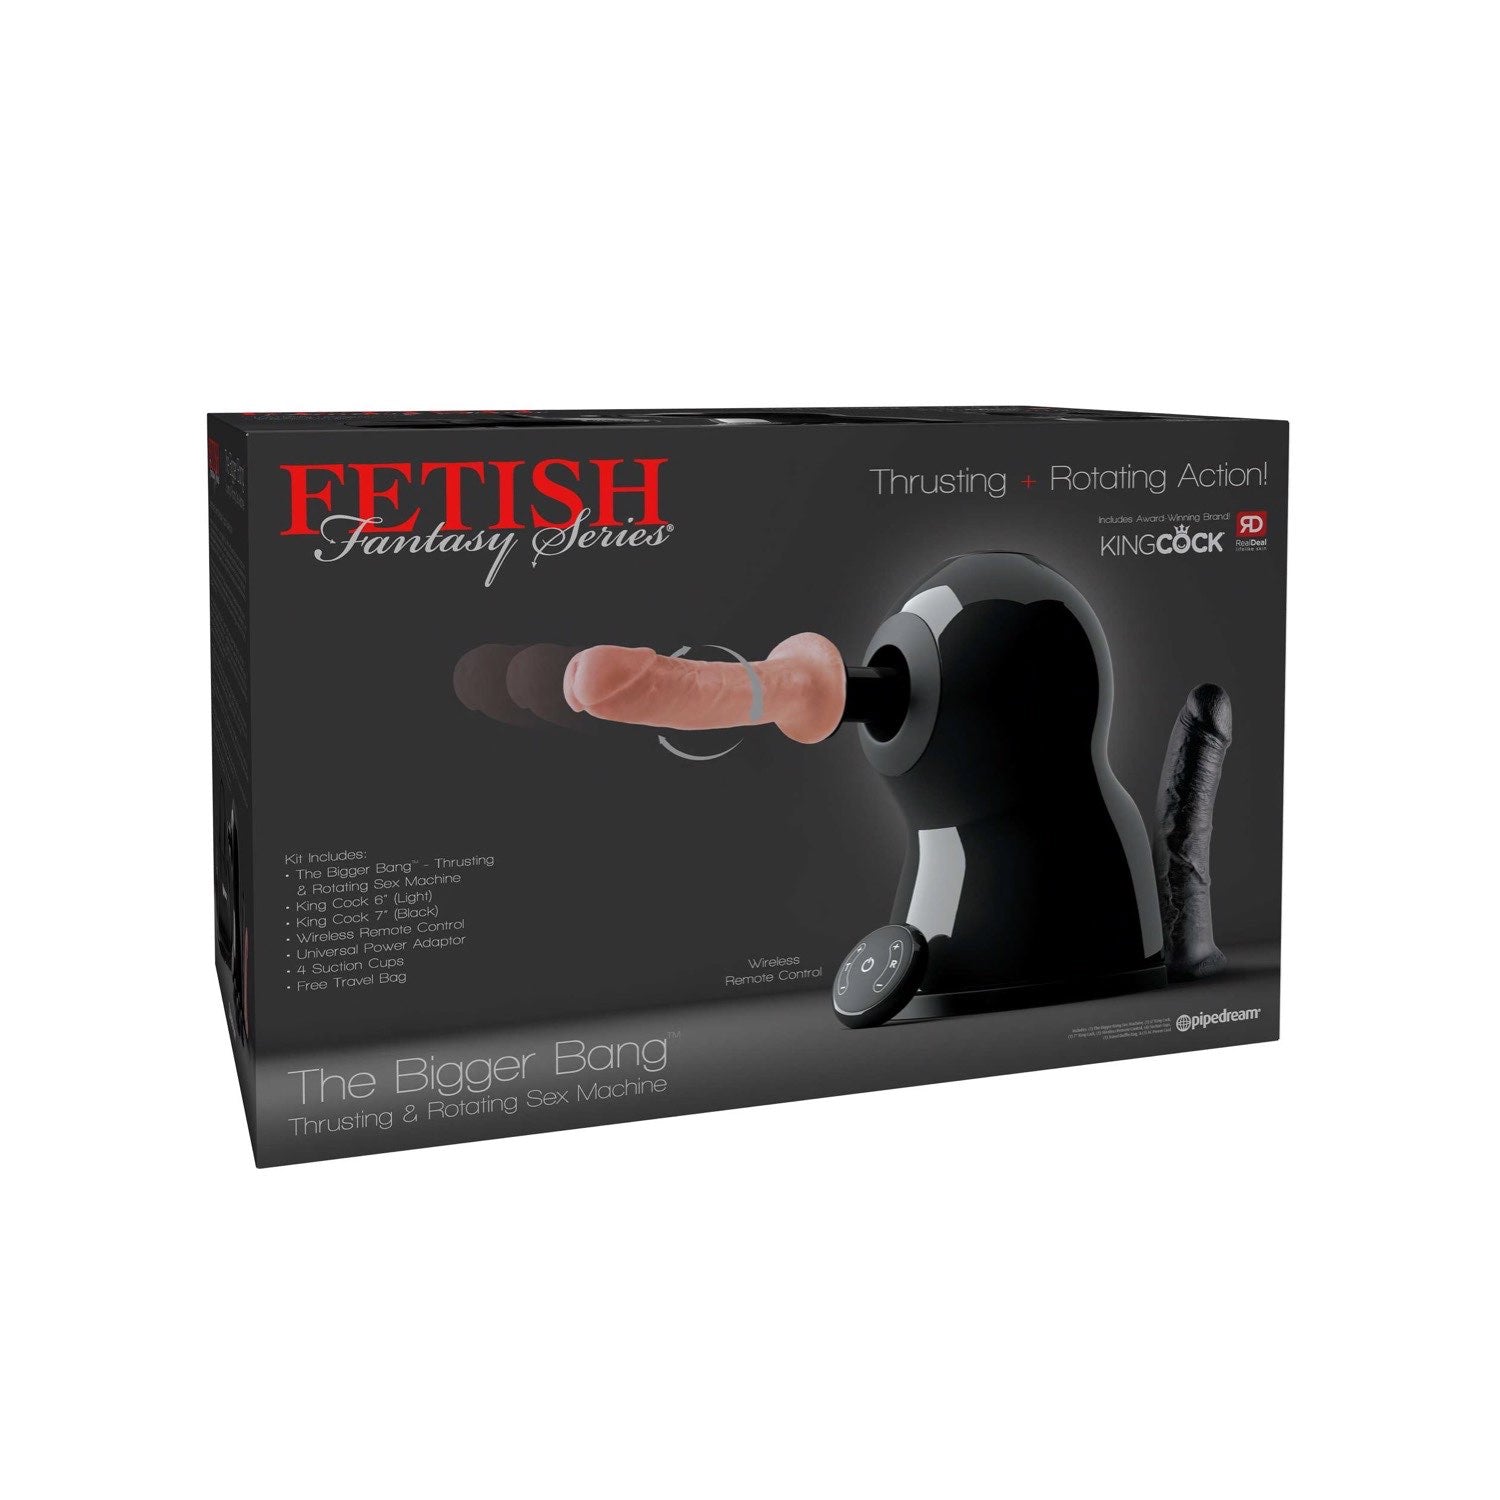 Fetish Fantasy Series The Bigger Bang Thrusting &amp; Rotating Sex Machine - Powered Machine with 2 Dong Attachments by Pipedream